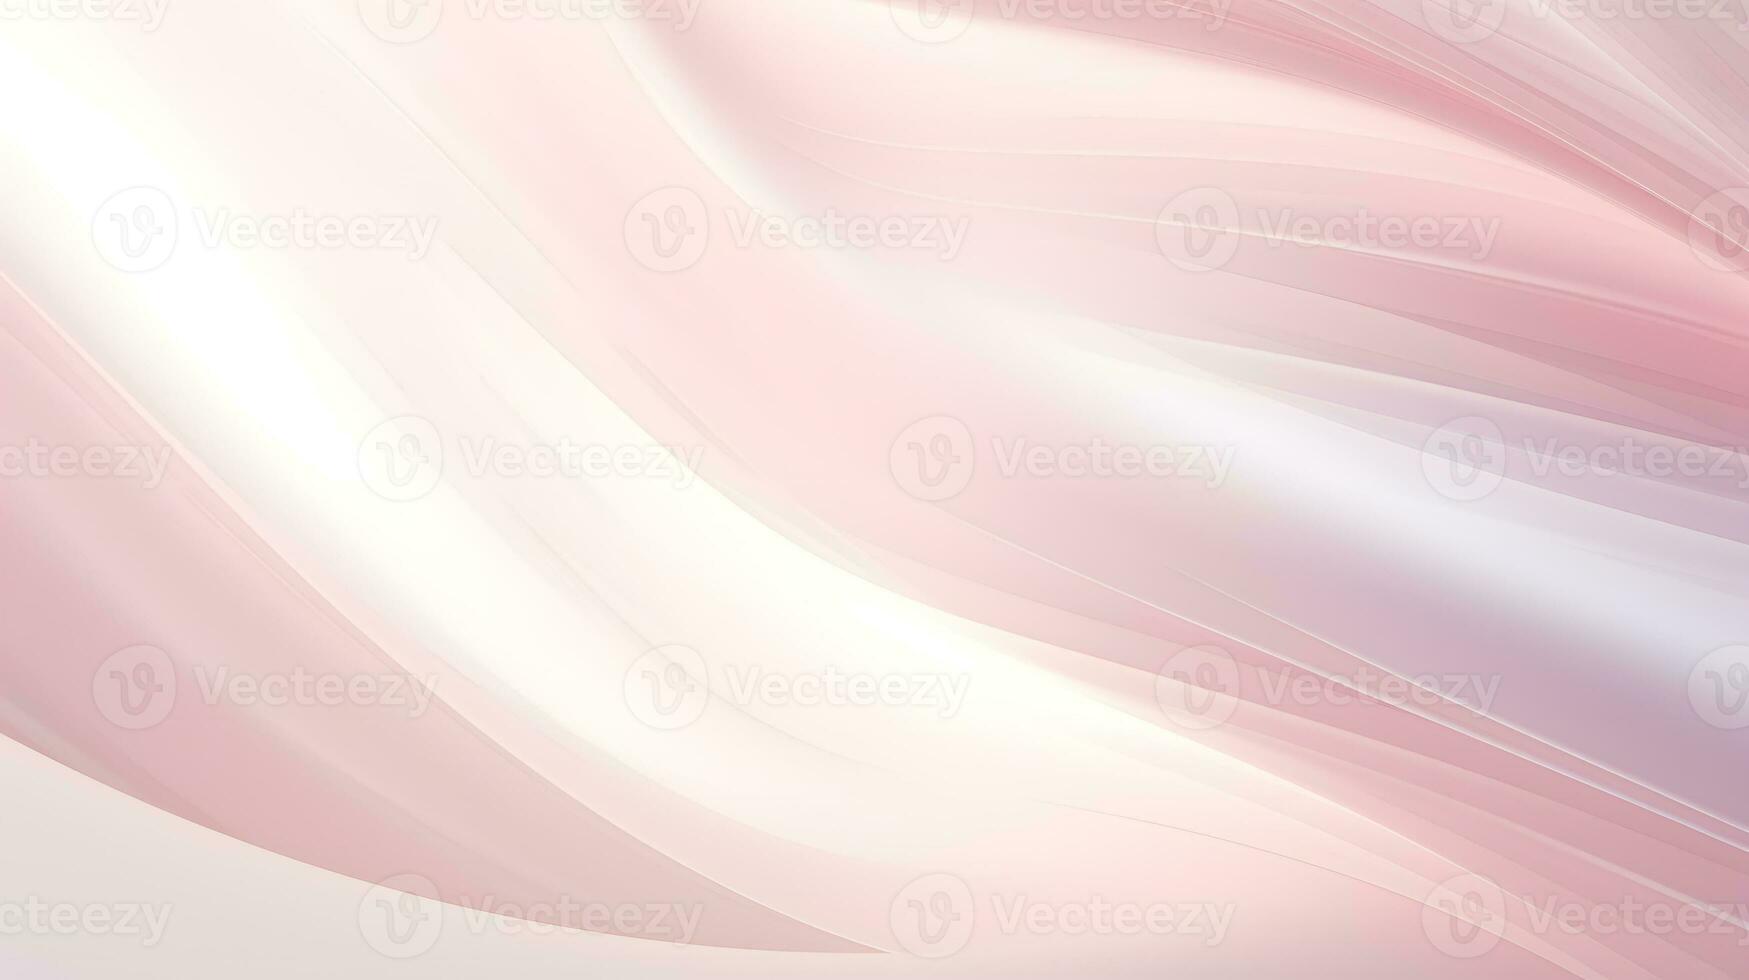 Abstract background with smooth lines in pastel pink and white colors photo